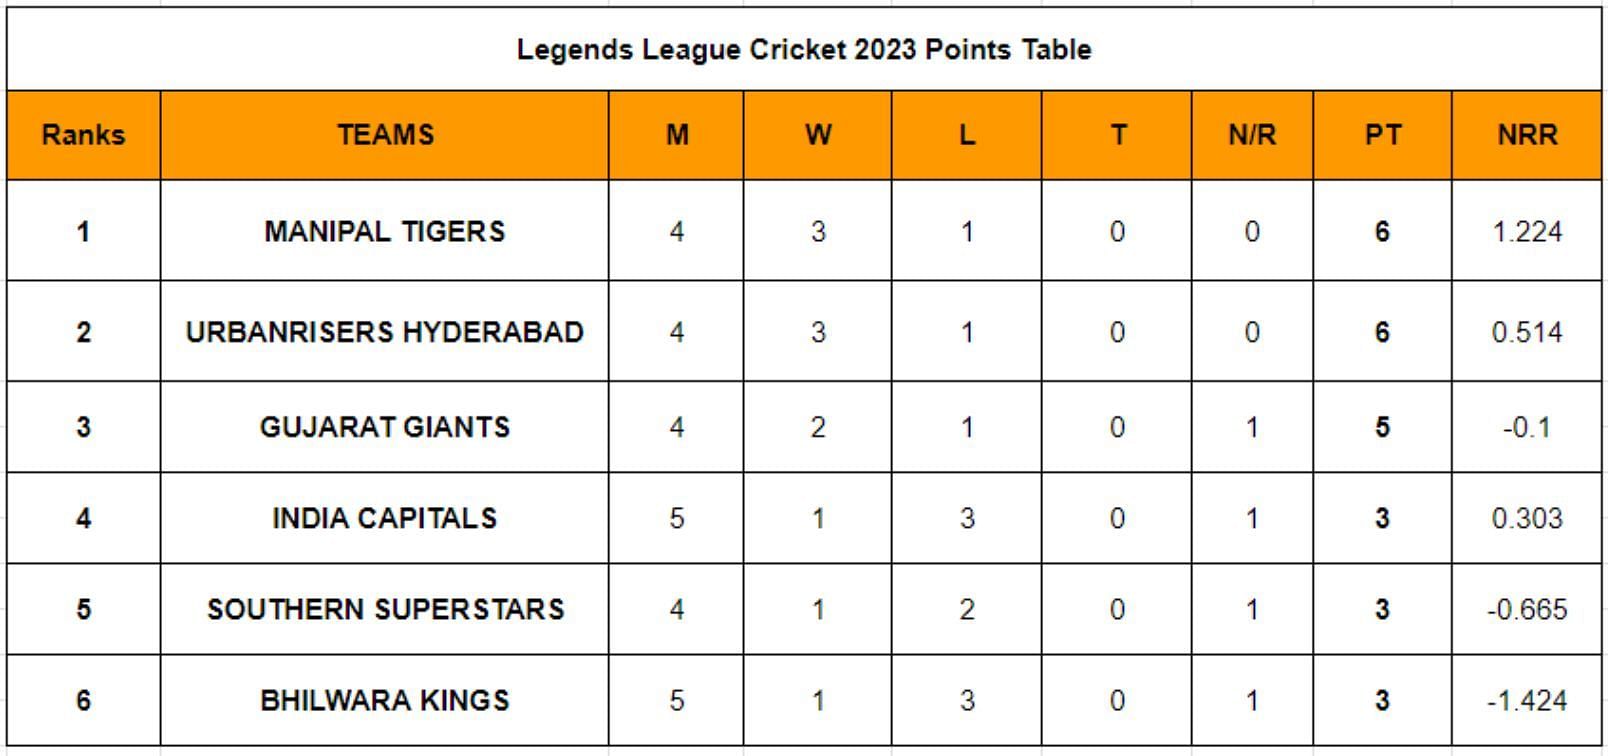 Legends League Cricket 2023 Points Table: Updated standings after India Capitals vs Manipal Tigers Match 13